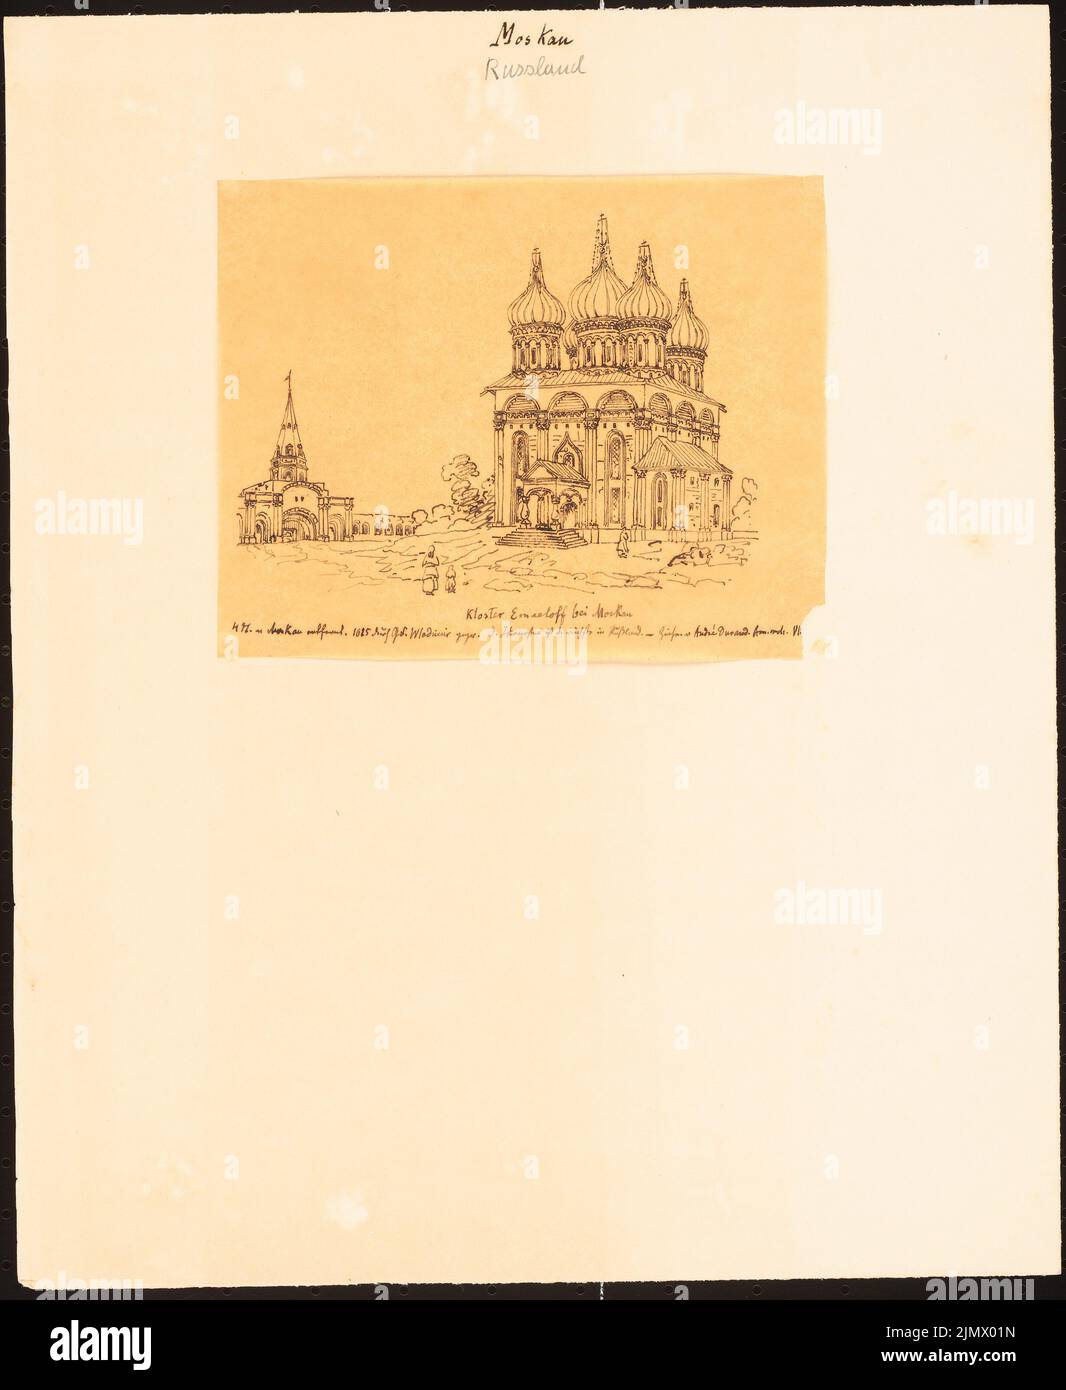 Quast Ferdinand von (1807-1877), Emerleoff monastery near Moscow (without dat.): Control: Perspective view of the monastery church, after André Durand VI (...). Ink on transparent, 35.5 x 29.1 cm (including scan edges) Quast Ferdinand von  (1807-1877): Kloster Emaeloff, Moskau Stock Photo